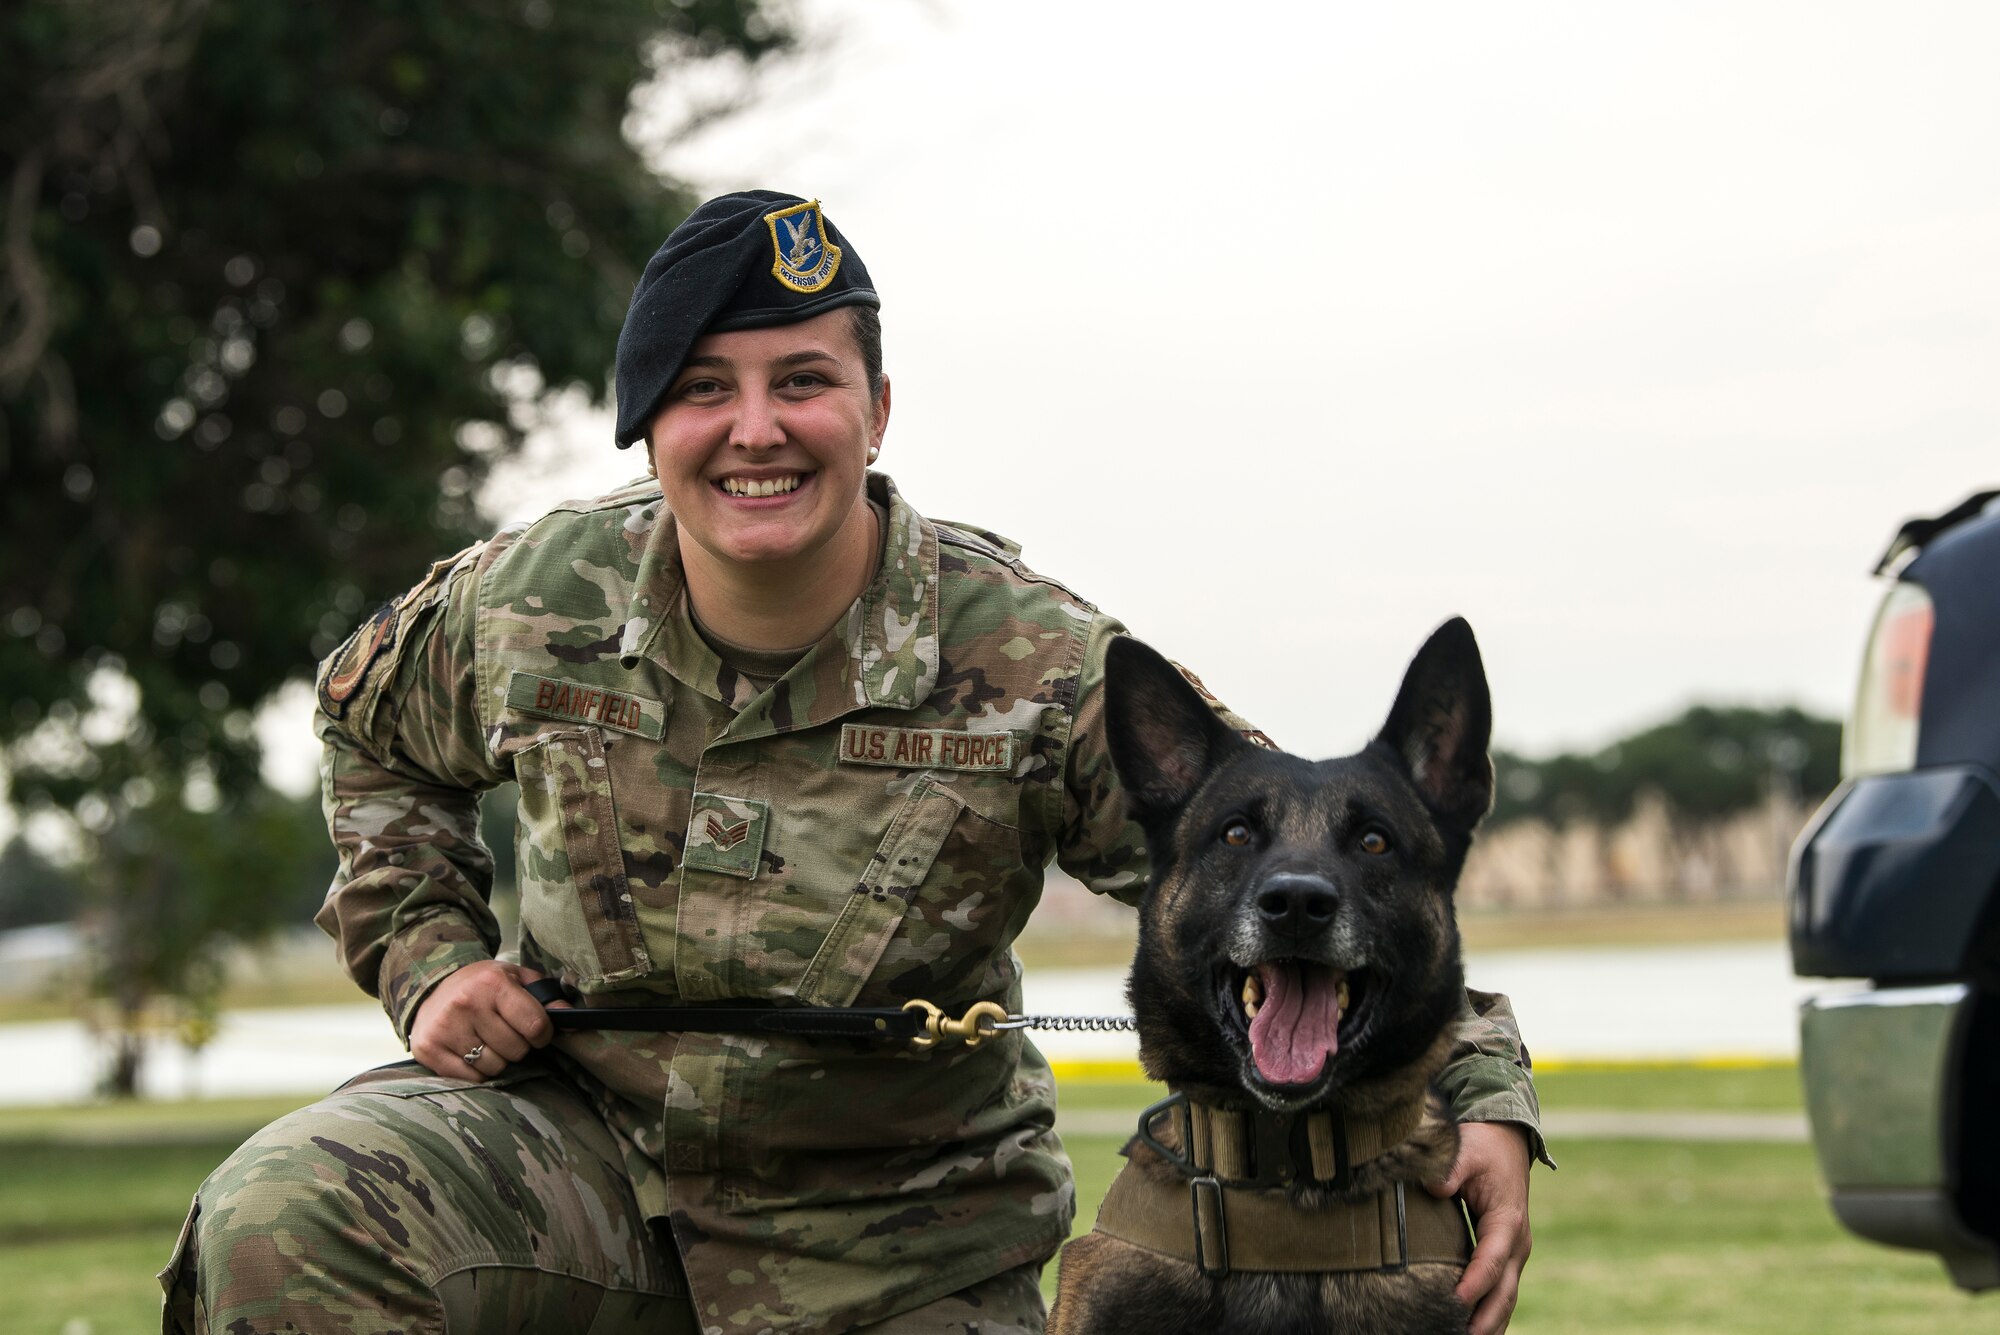 Senior Airman Eryn Banfield, 27th Special Operations Security Forces Squadron military working dog handler, and MWD Ari Valdo, finish a demonstration at the National Night Out in Clovis, N.M., August 6, 2019. The demonstration went over different scenarios to show the training of Cannon Air Force Base’s military working dogs. (U.S. Air Force photo by Senior Airman Vernon R. Walter III)